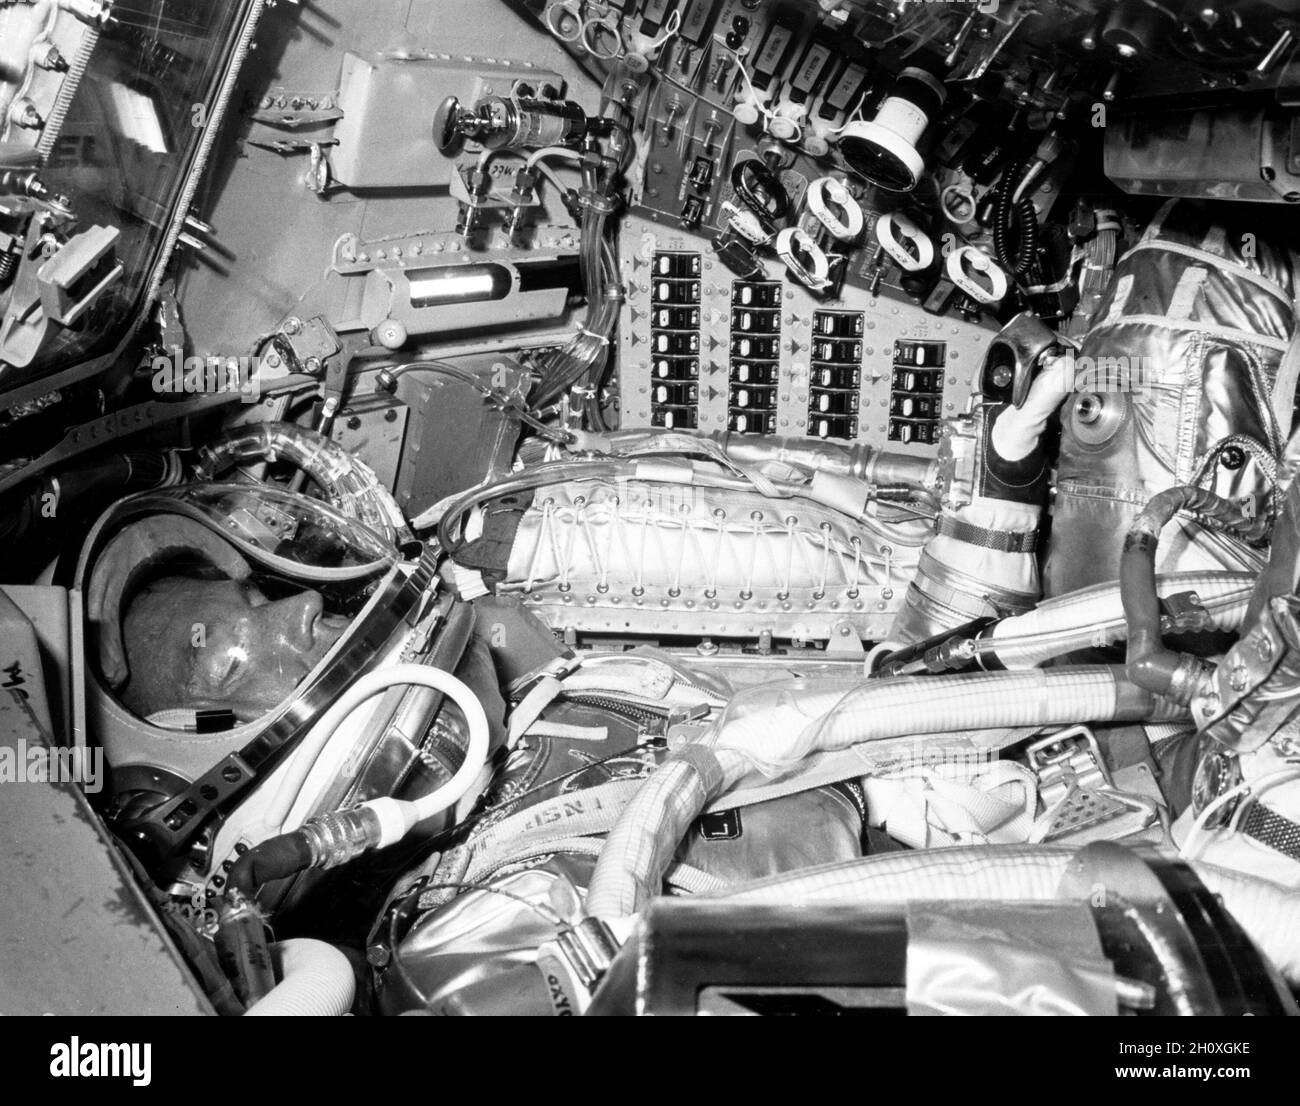 (1963) --- Astronaut L. Gordon Cooper Jr., prime pilot for the Mercury-Atlas 9 (MA-9) mission, inside his Mercury spacecraft, runs through one of the numerous preflight checks surrounded by dials, switches, indicators and buttons Stock Photo